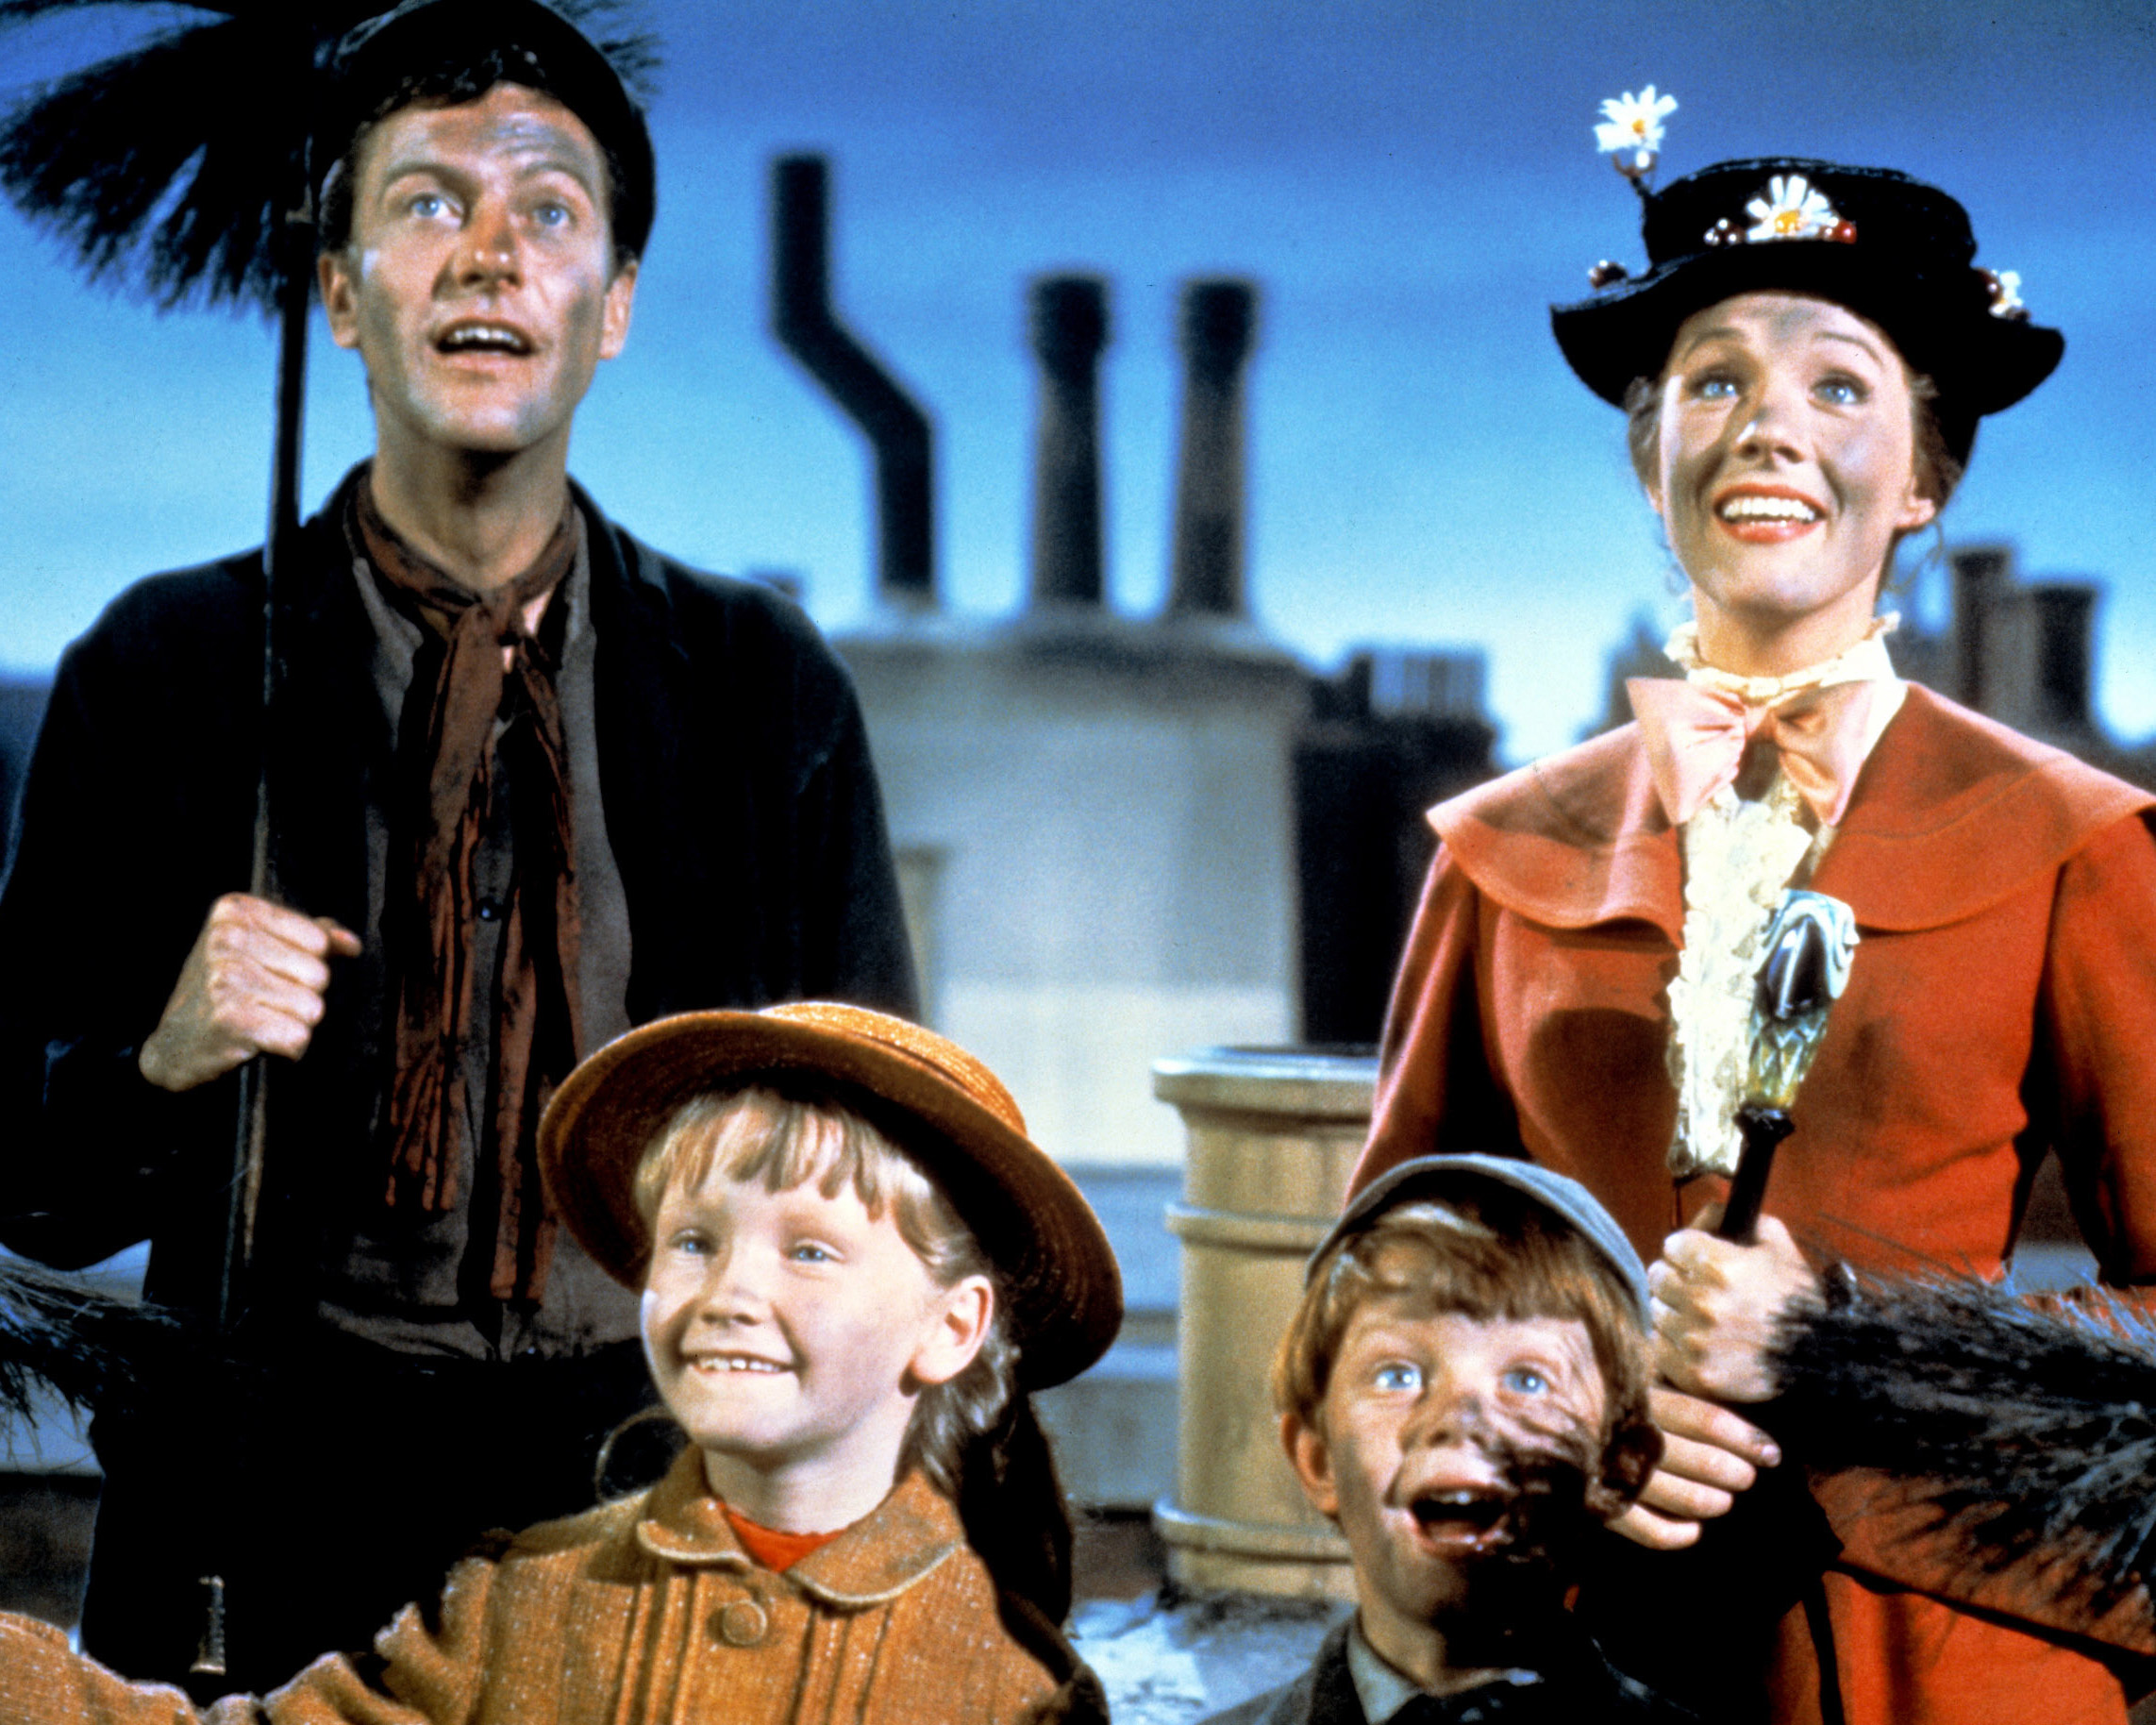 Dick Van Dyke as Bert, Julie Andrews as Mary Poppins, Karen Dotrice as Jane Banks and Matthew Garber as Michael Banks in the Disney musical 'Mary Poppins.' (Silver Screen Collection—Hulton Archive/Getty Images)